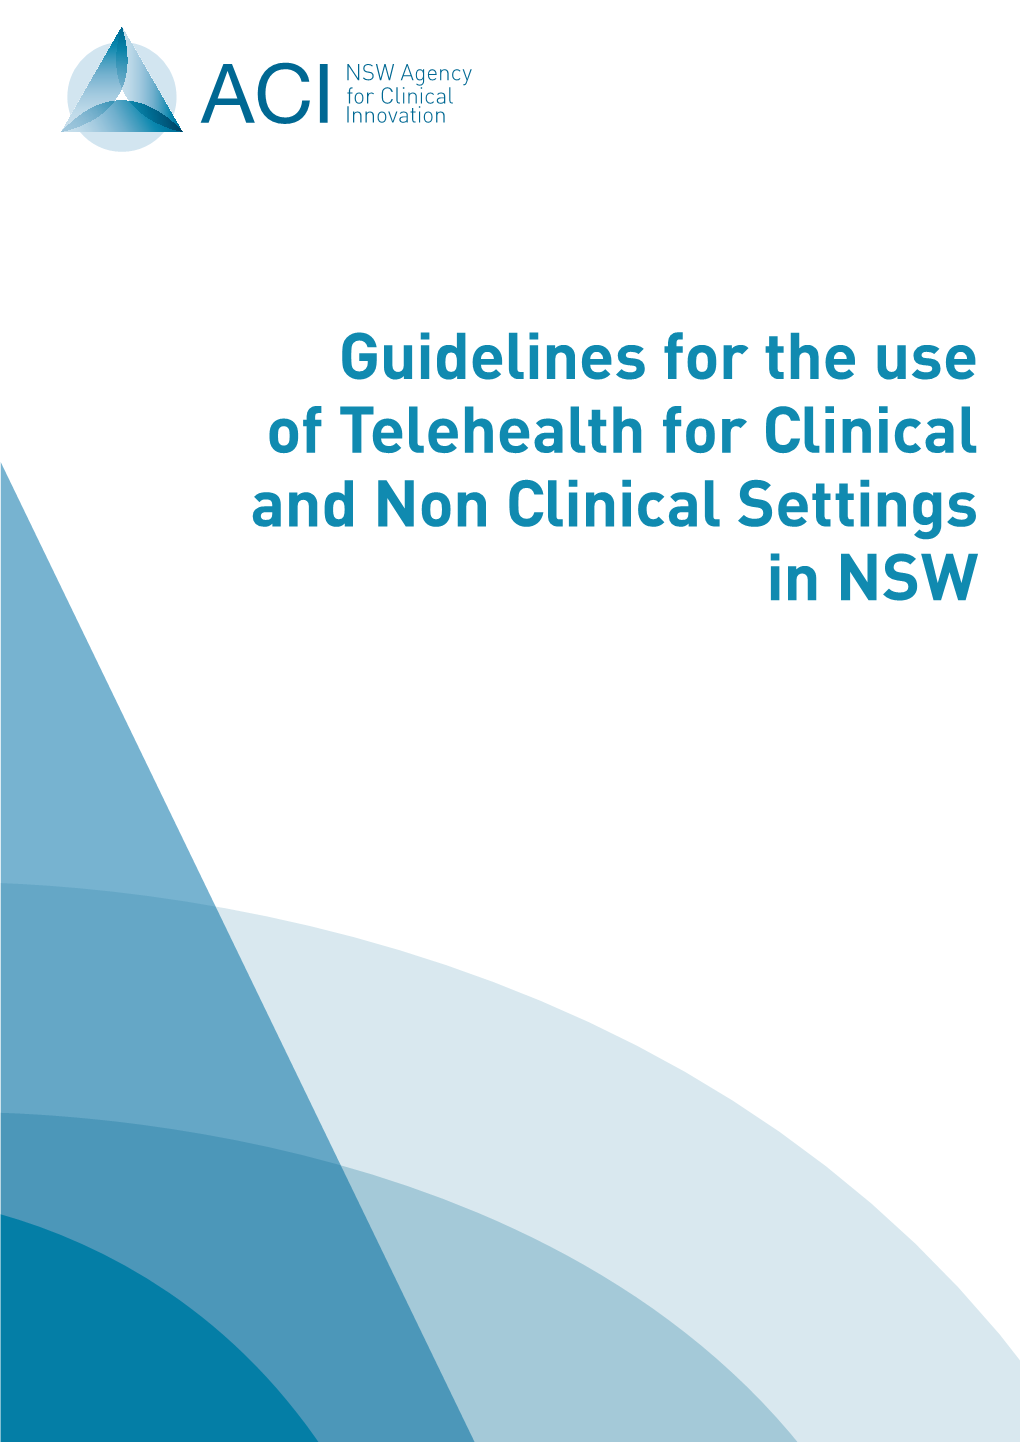 Guidelines for the Use of Telehealth for Clinical and Non Clinical